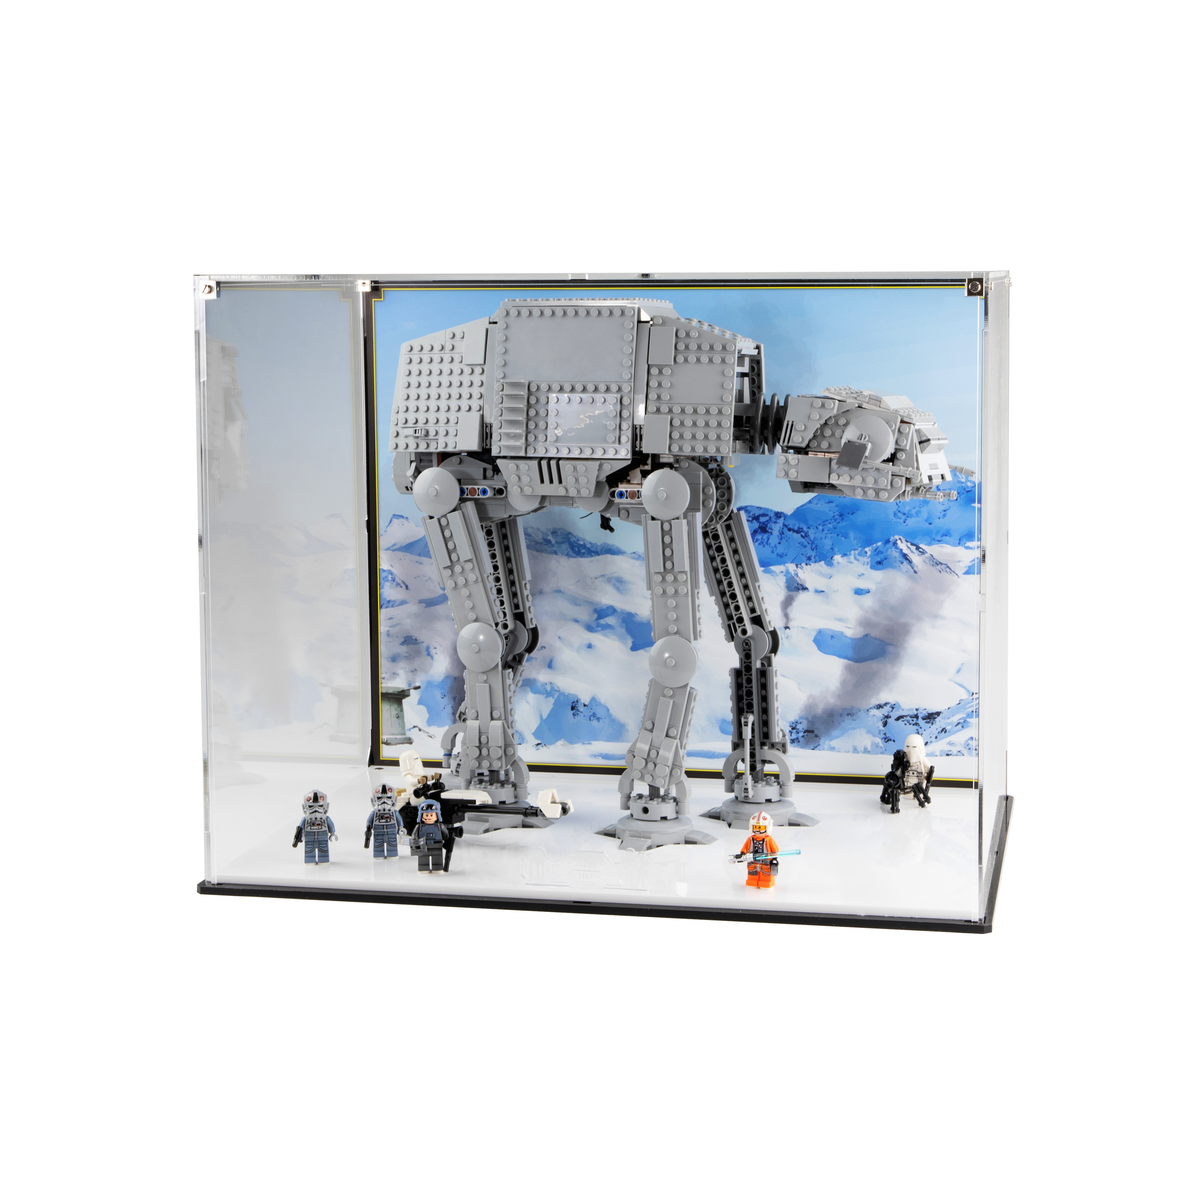 LEGO Star Wars 75288 AT-AT™, Auf Lager